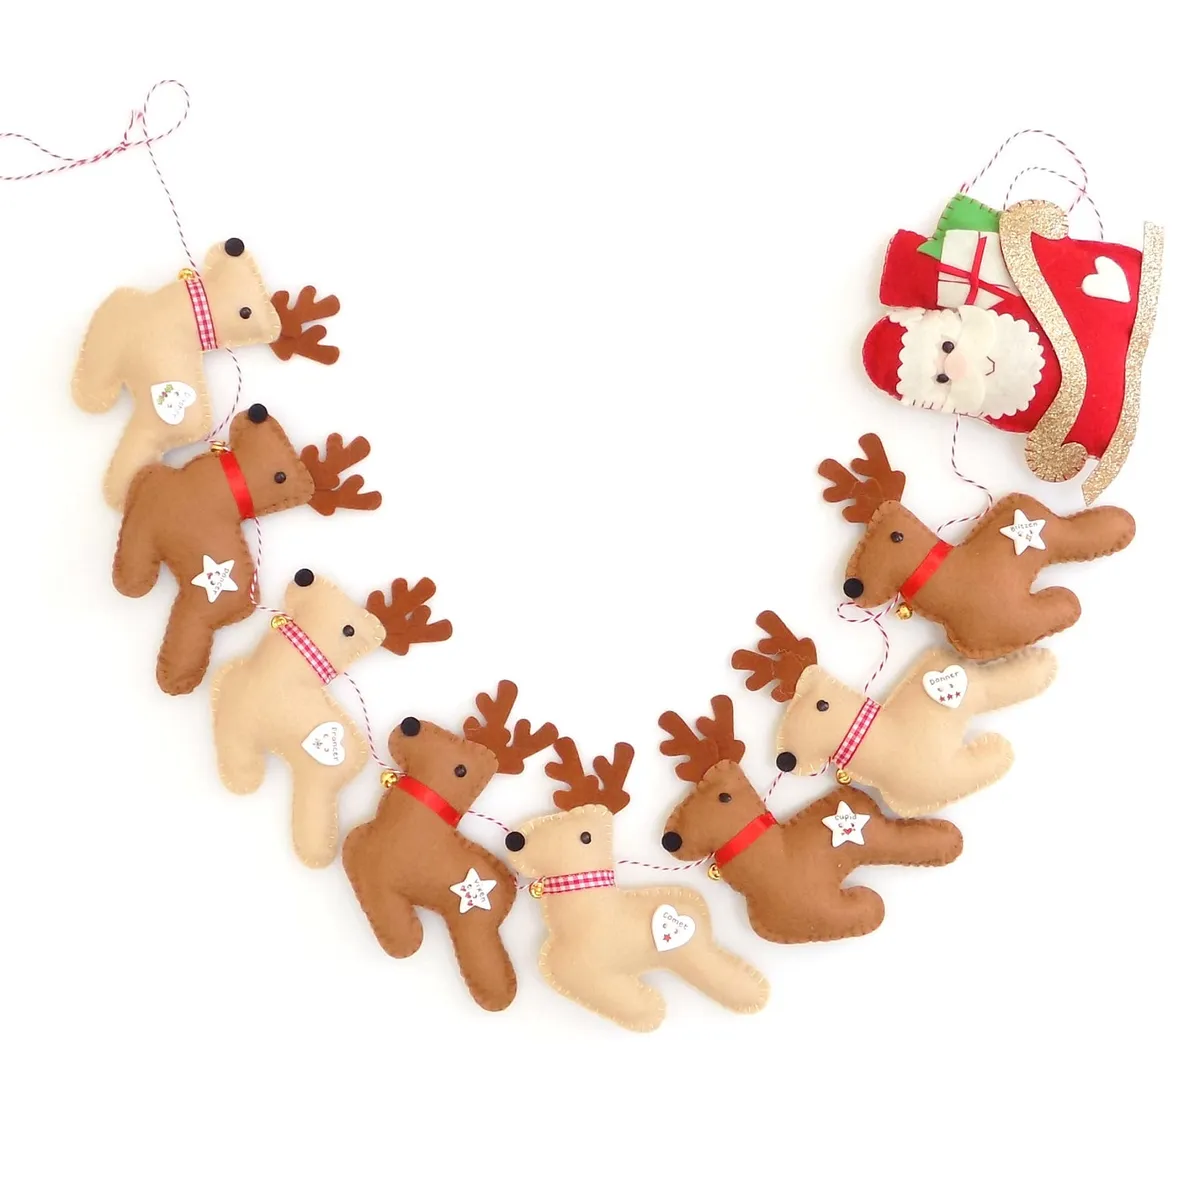 Christmas sewing projects – Santa and reindeer garland